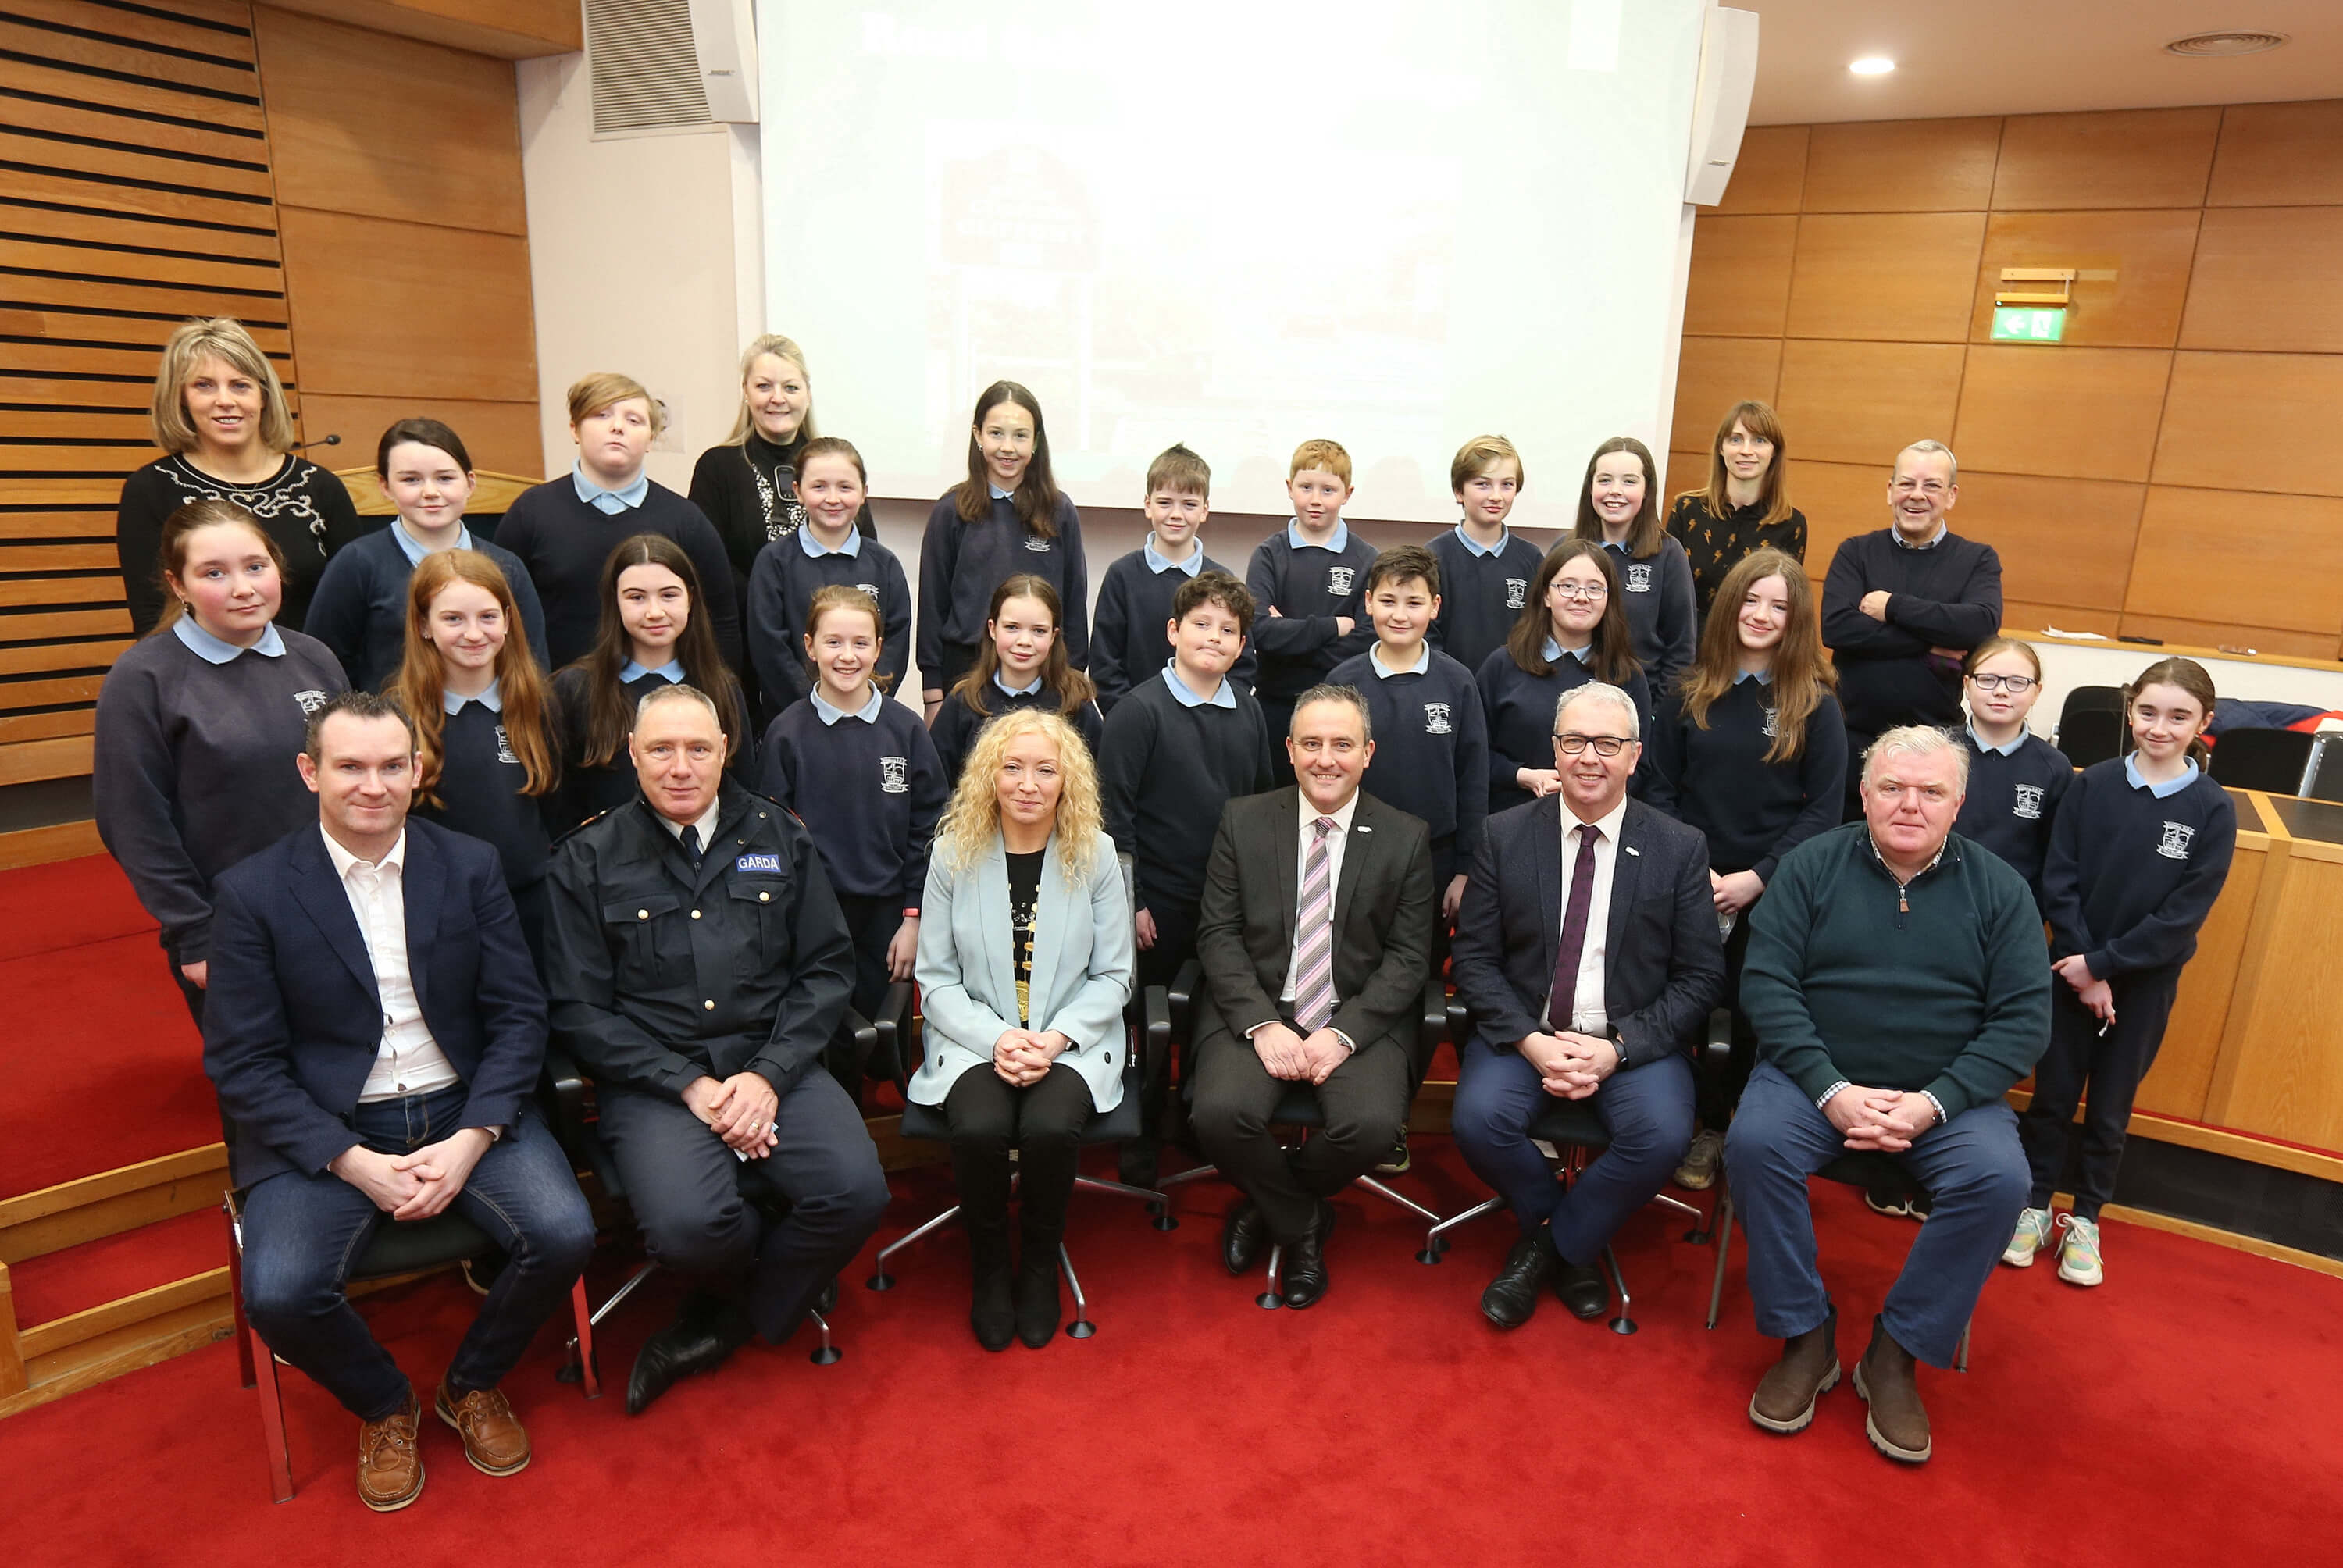 Pupils of Cliffoney National School impress at County Hall